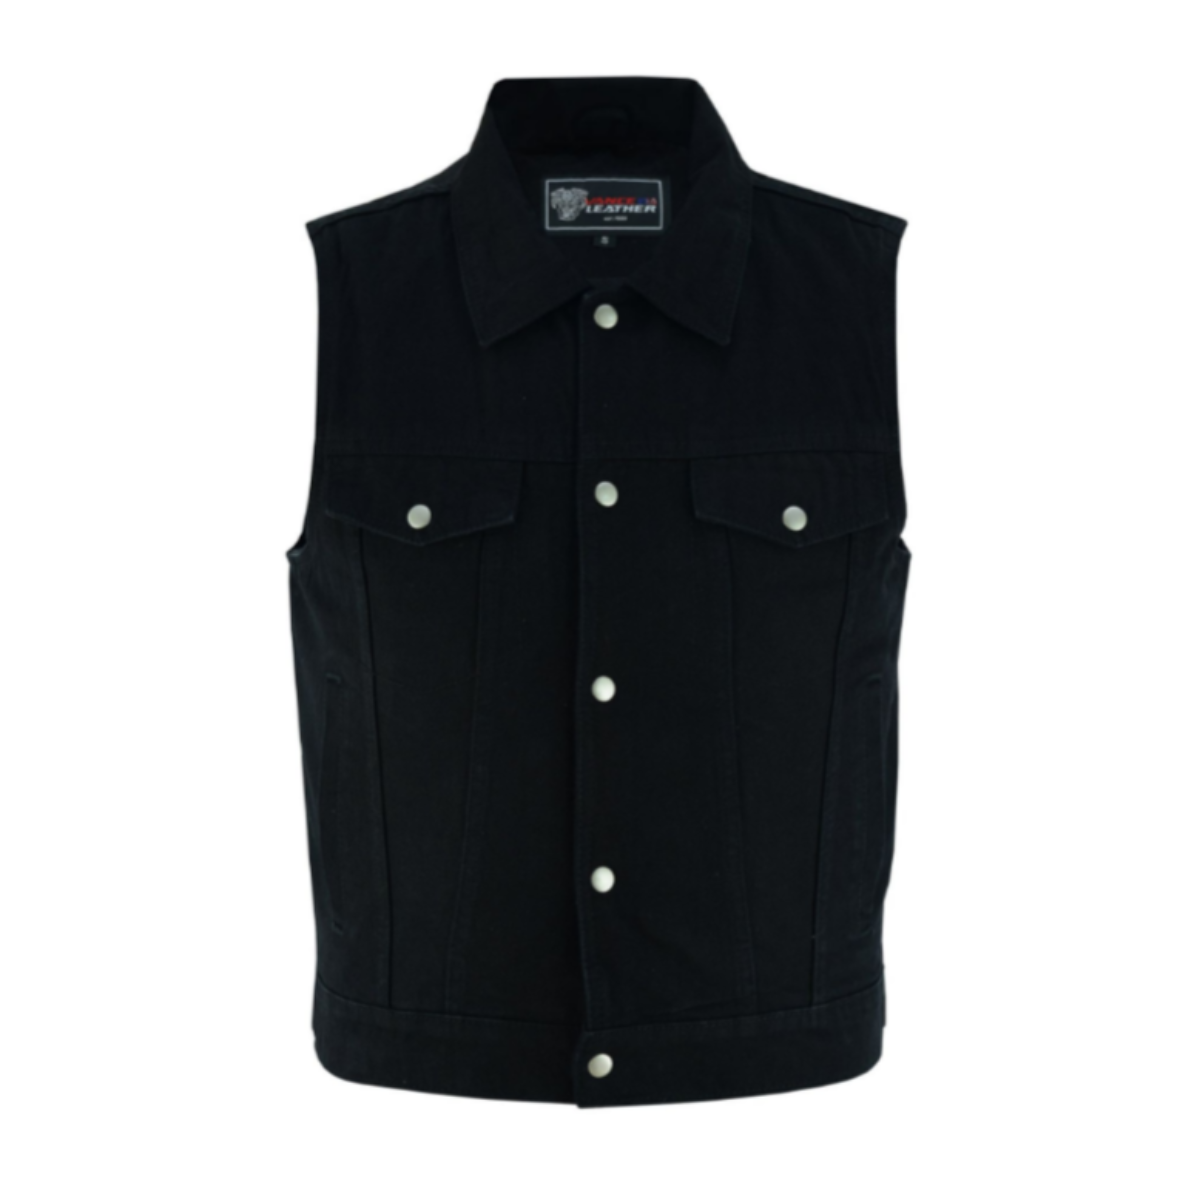 The Vance Leather Men's Denim Vest with Collar, with an adjustable bottom.